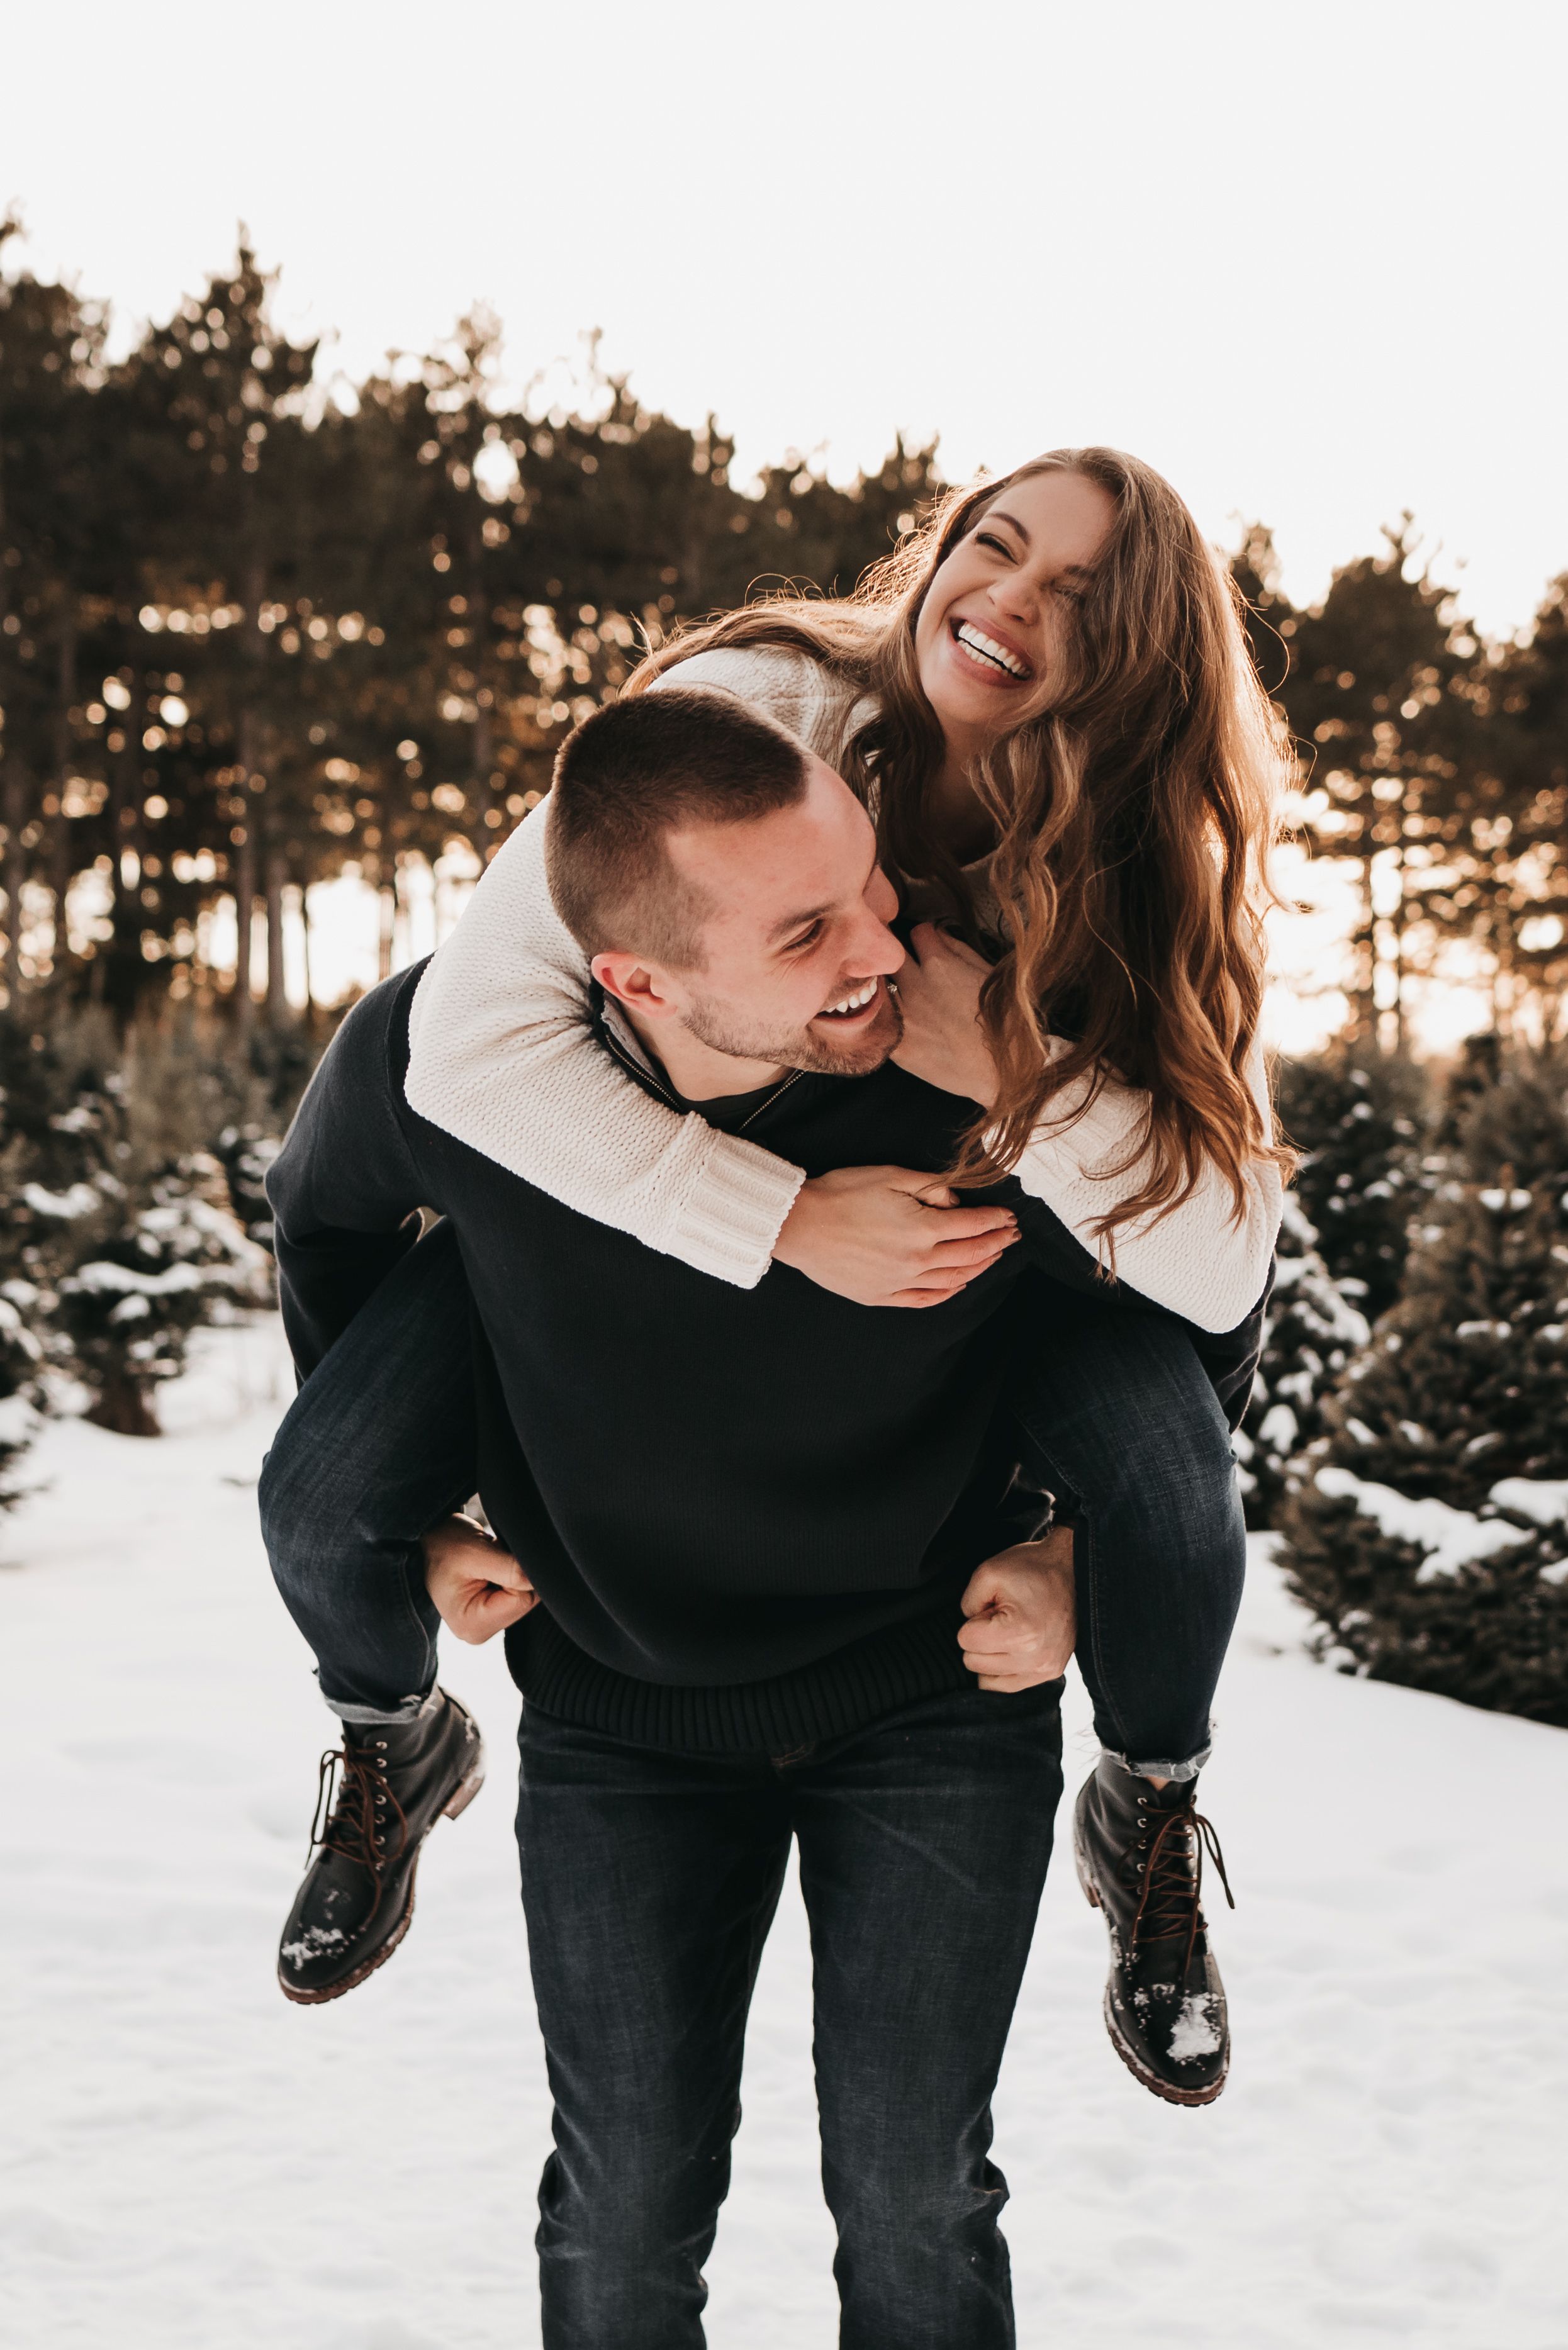 SHOOTING PROMPT / Give her the bounciest piggy back ride ever! #engagementsessiontips #engagemen. Piggy back ride, Cute couple picture, Photo poses for couples